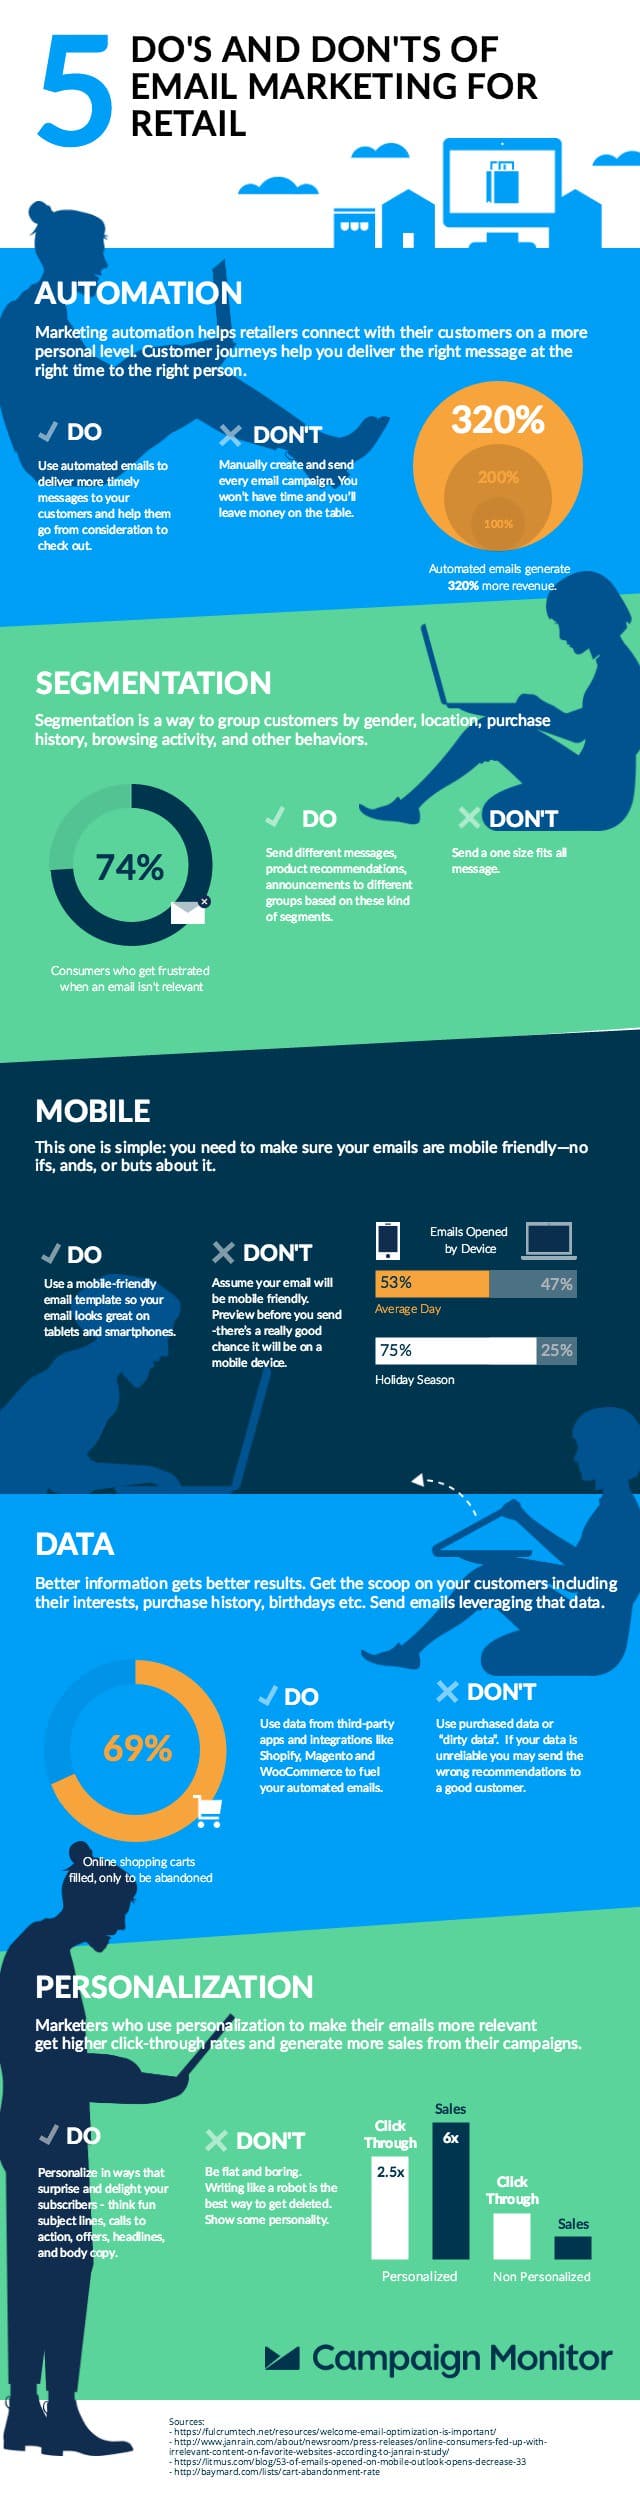 5-do-s-and-dont-s-of-email-marketing-for-retail-infographic-4